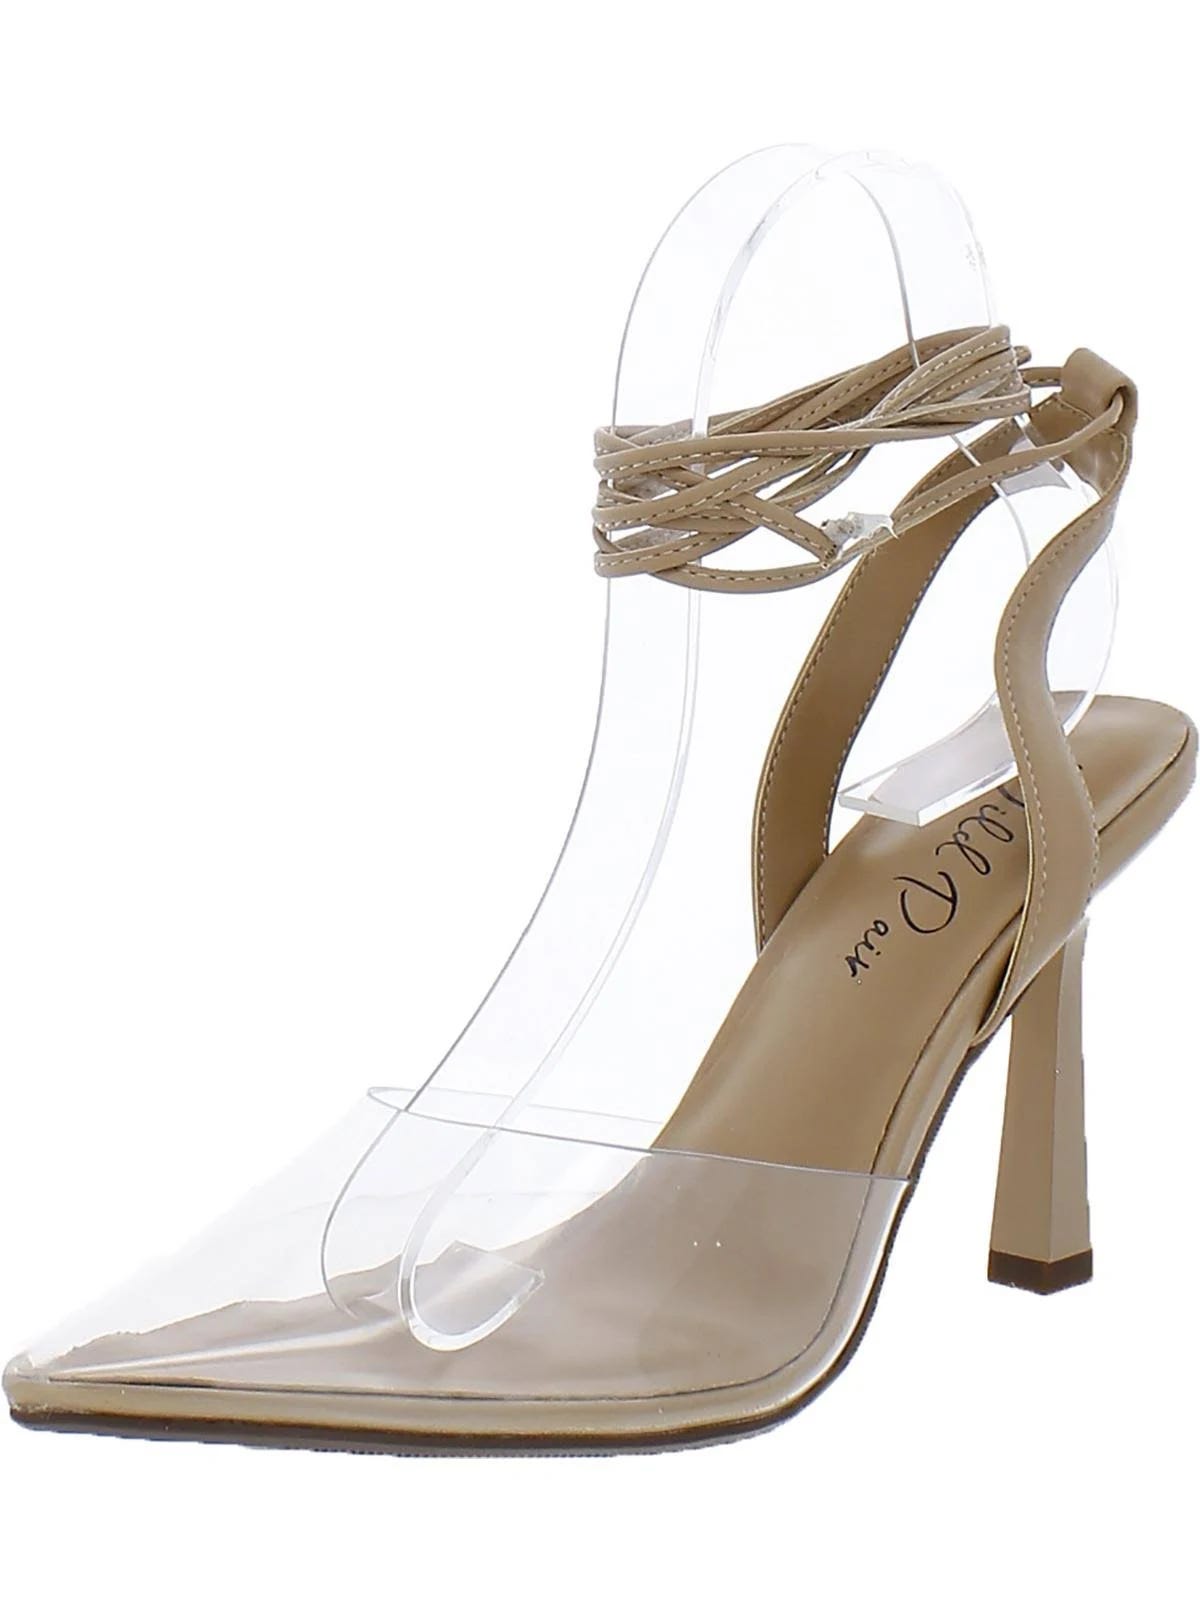 Translucent Pointed Toe Heels - Wild Pair Liberate Pumps | Image